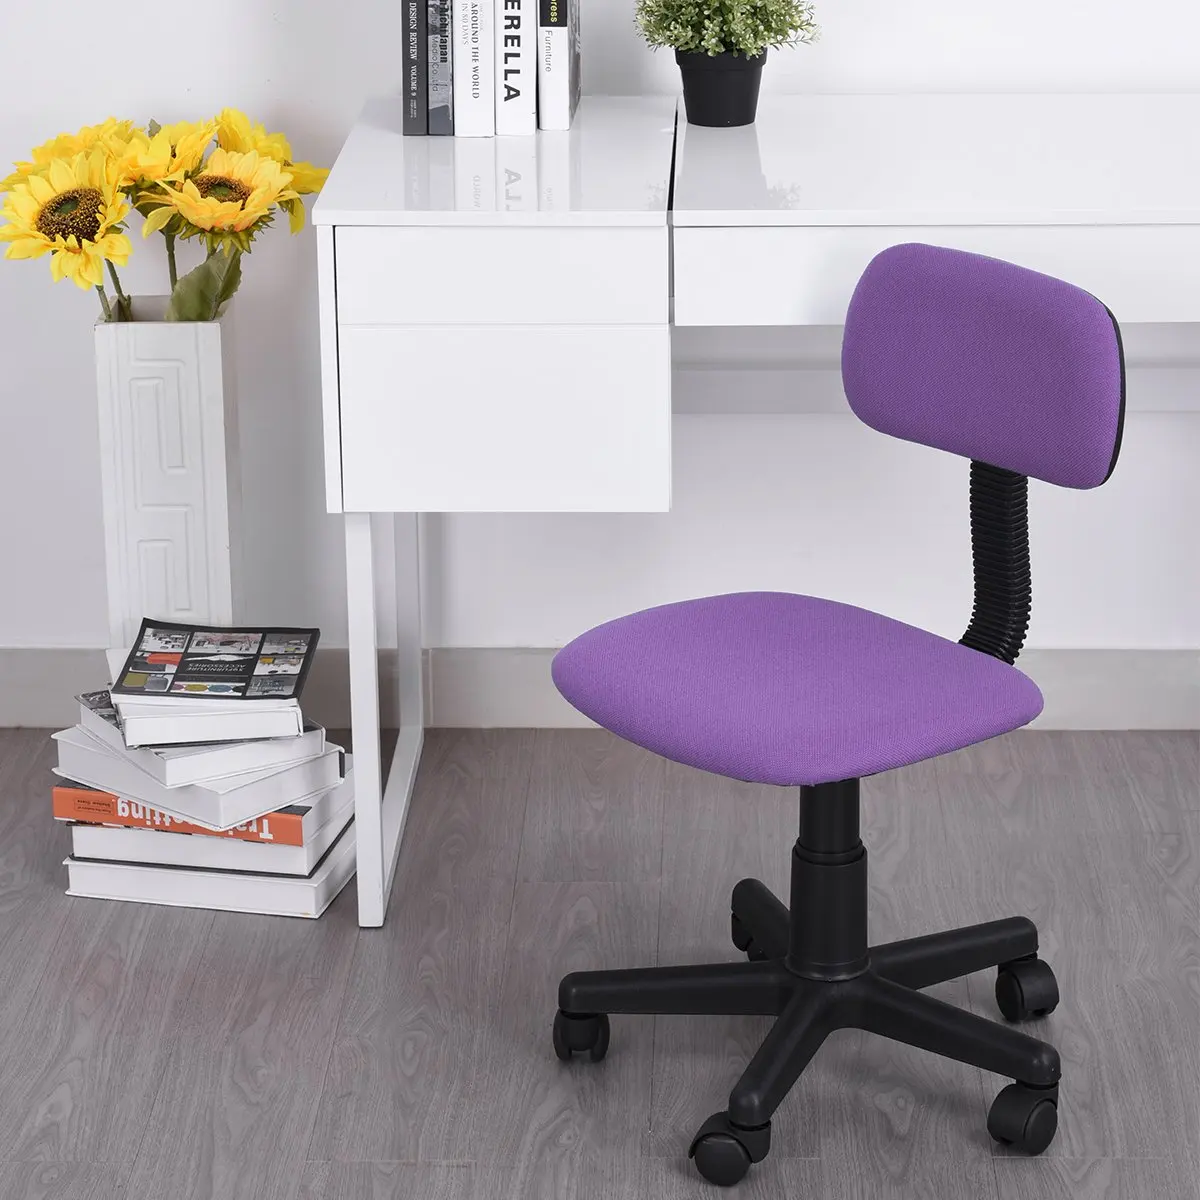 cheap desk chairs staples find desk chairs staples deals on